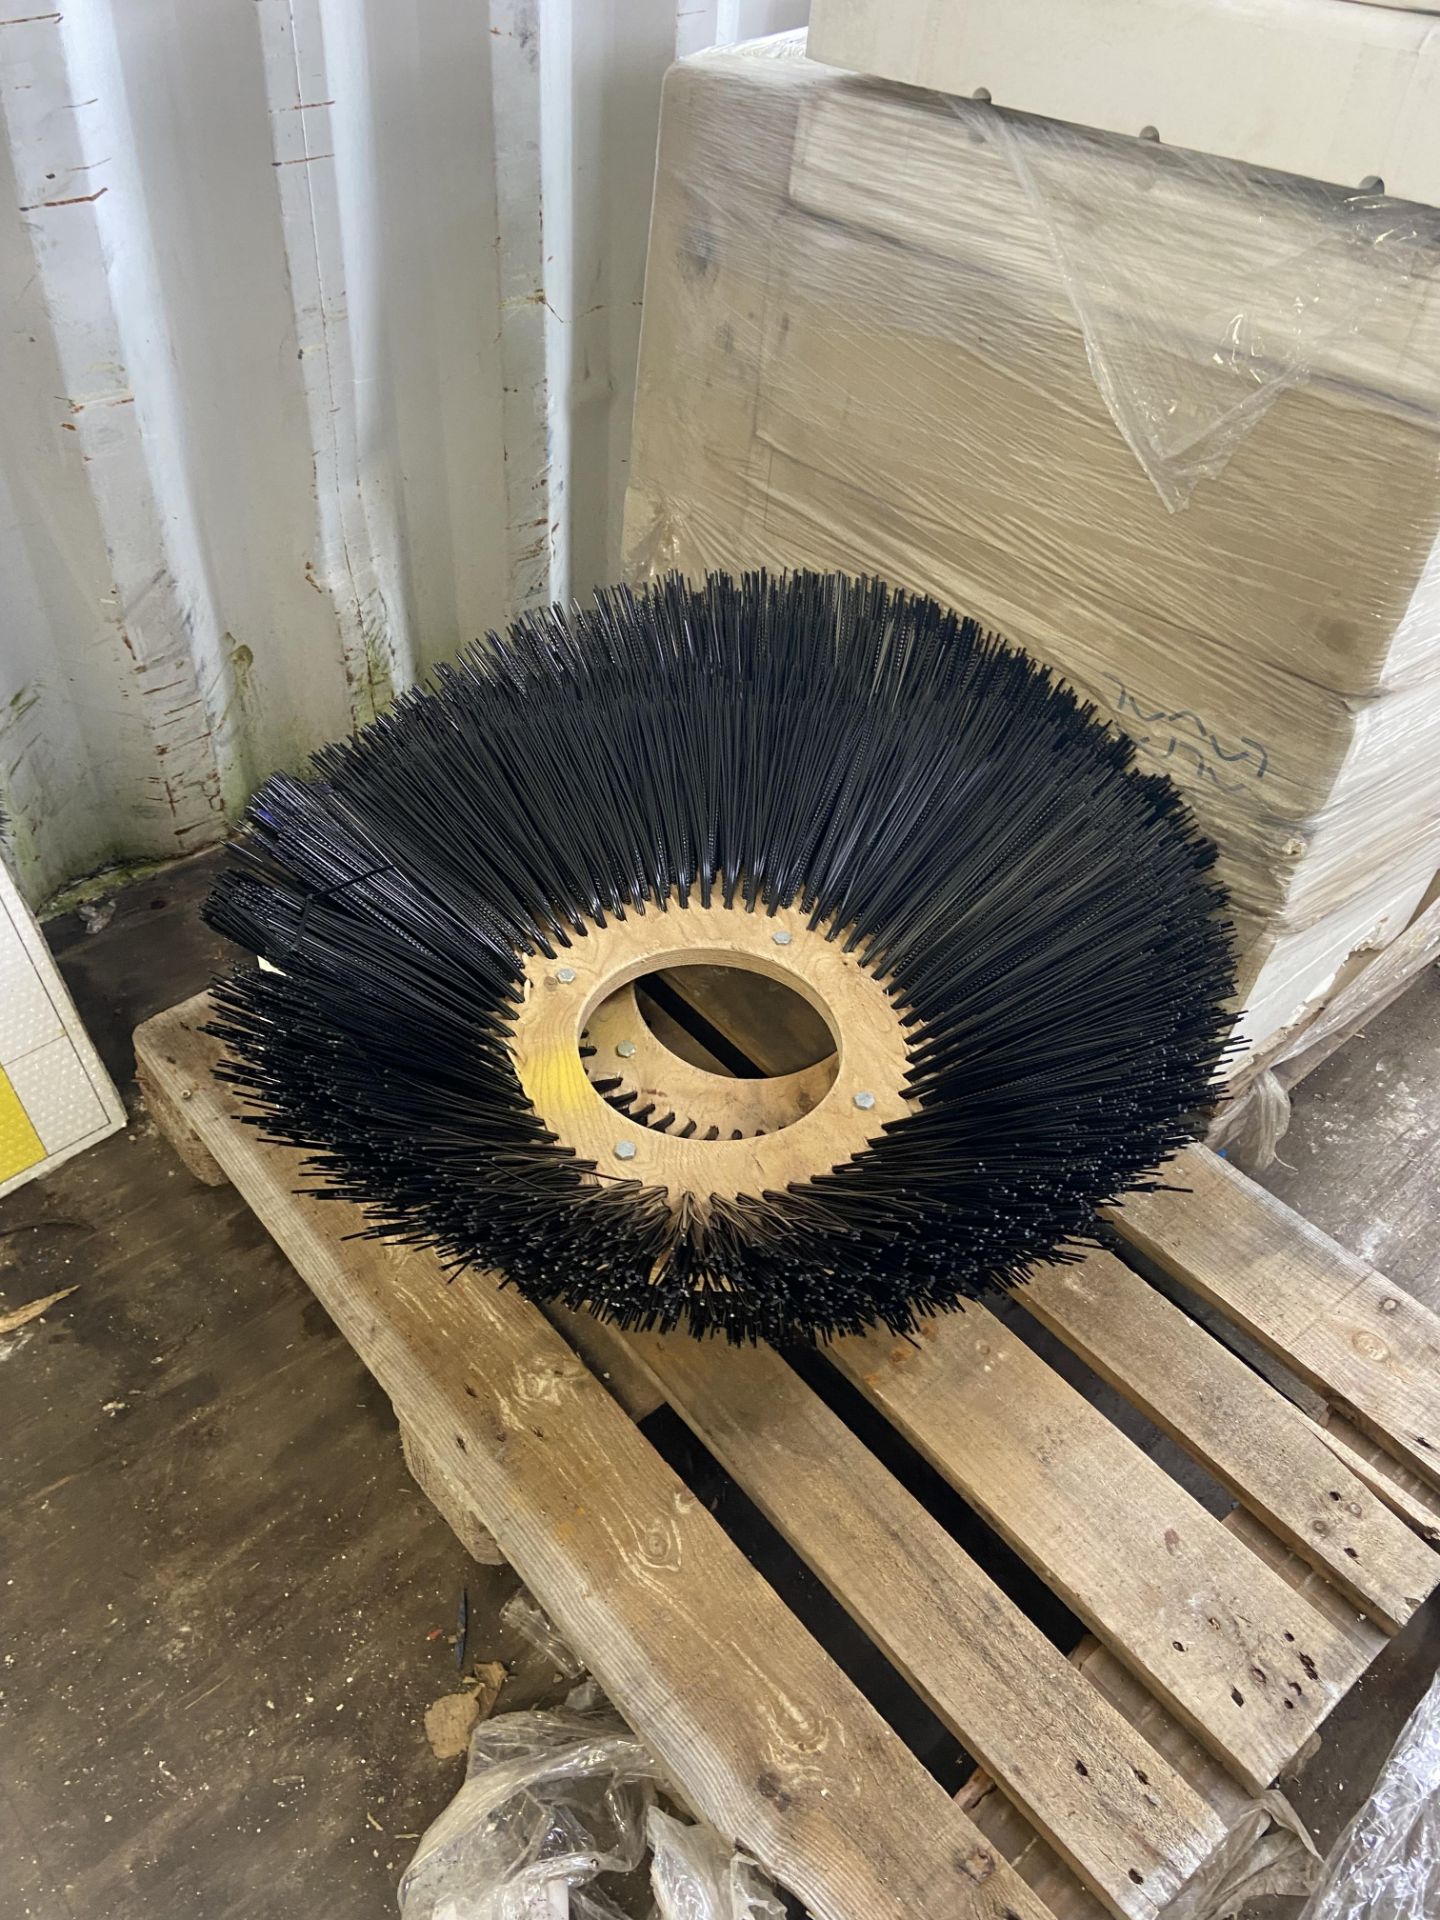 Two Sweeper/ Bungalow Brushes, approx. 950mm dia., lot located in Bretherton, Lancashire, lot loaded - Image 2 of 2